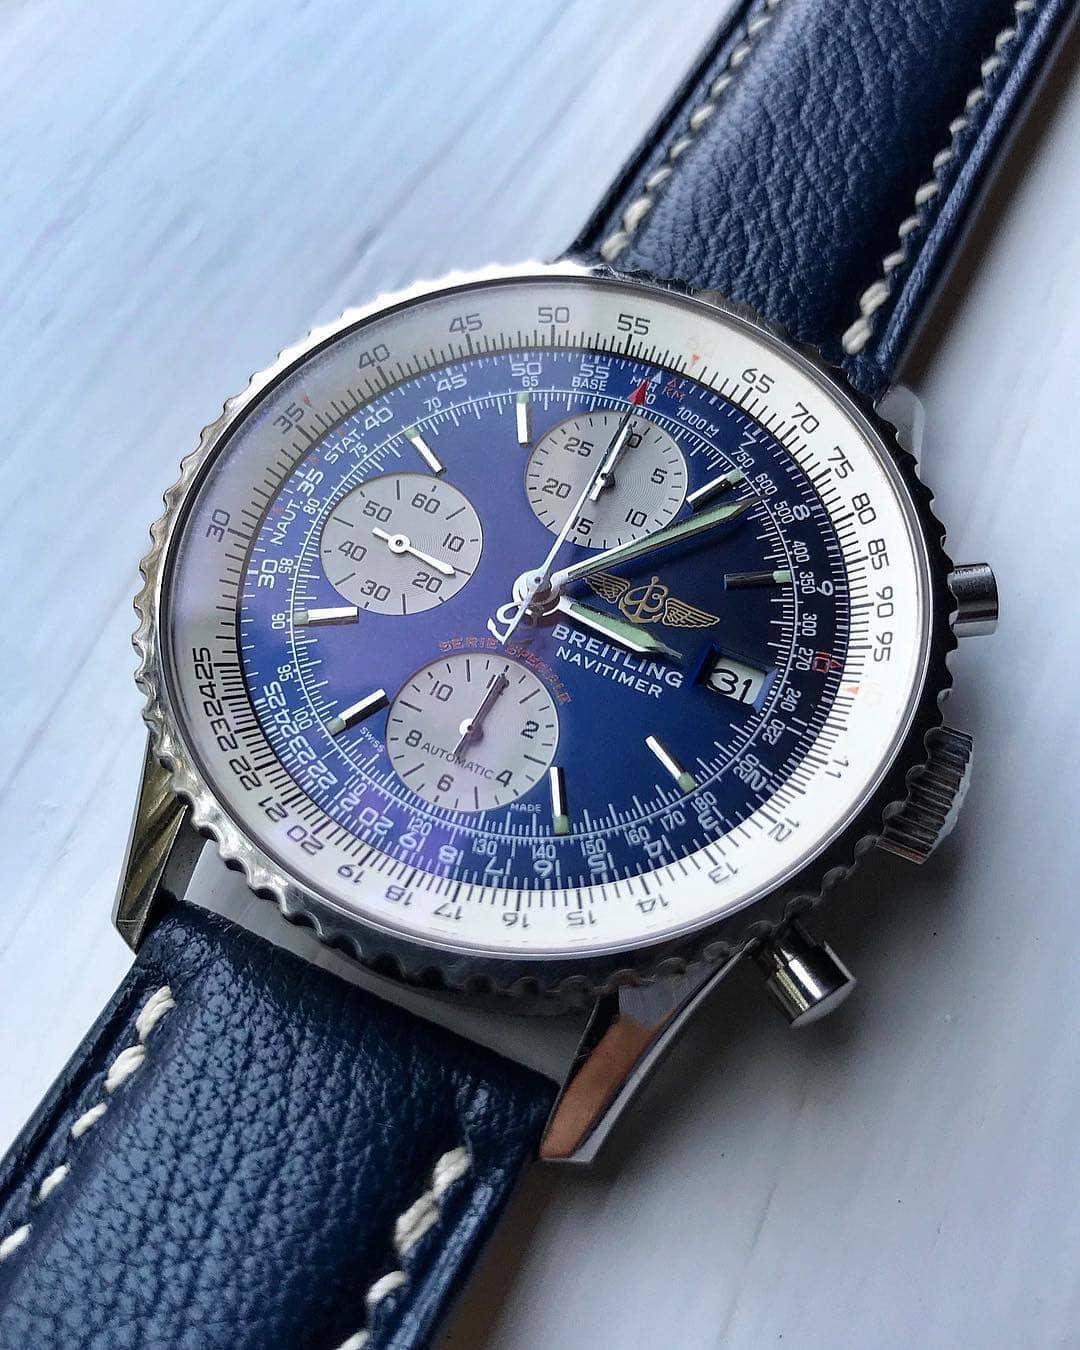 30 Top Luxury Watch Brands 2018 You Should Know